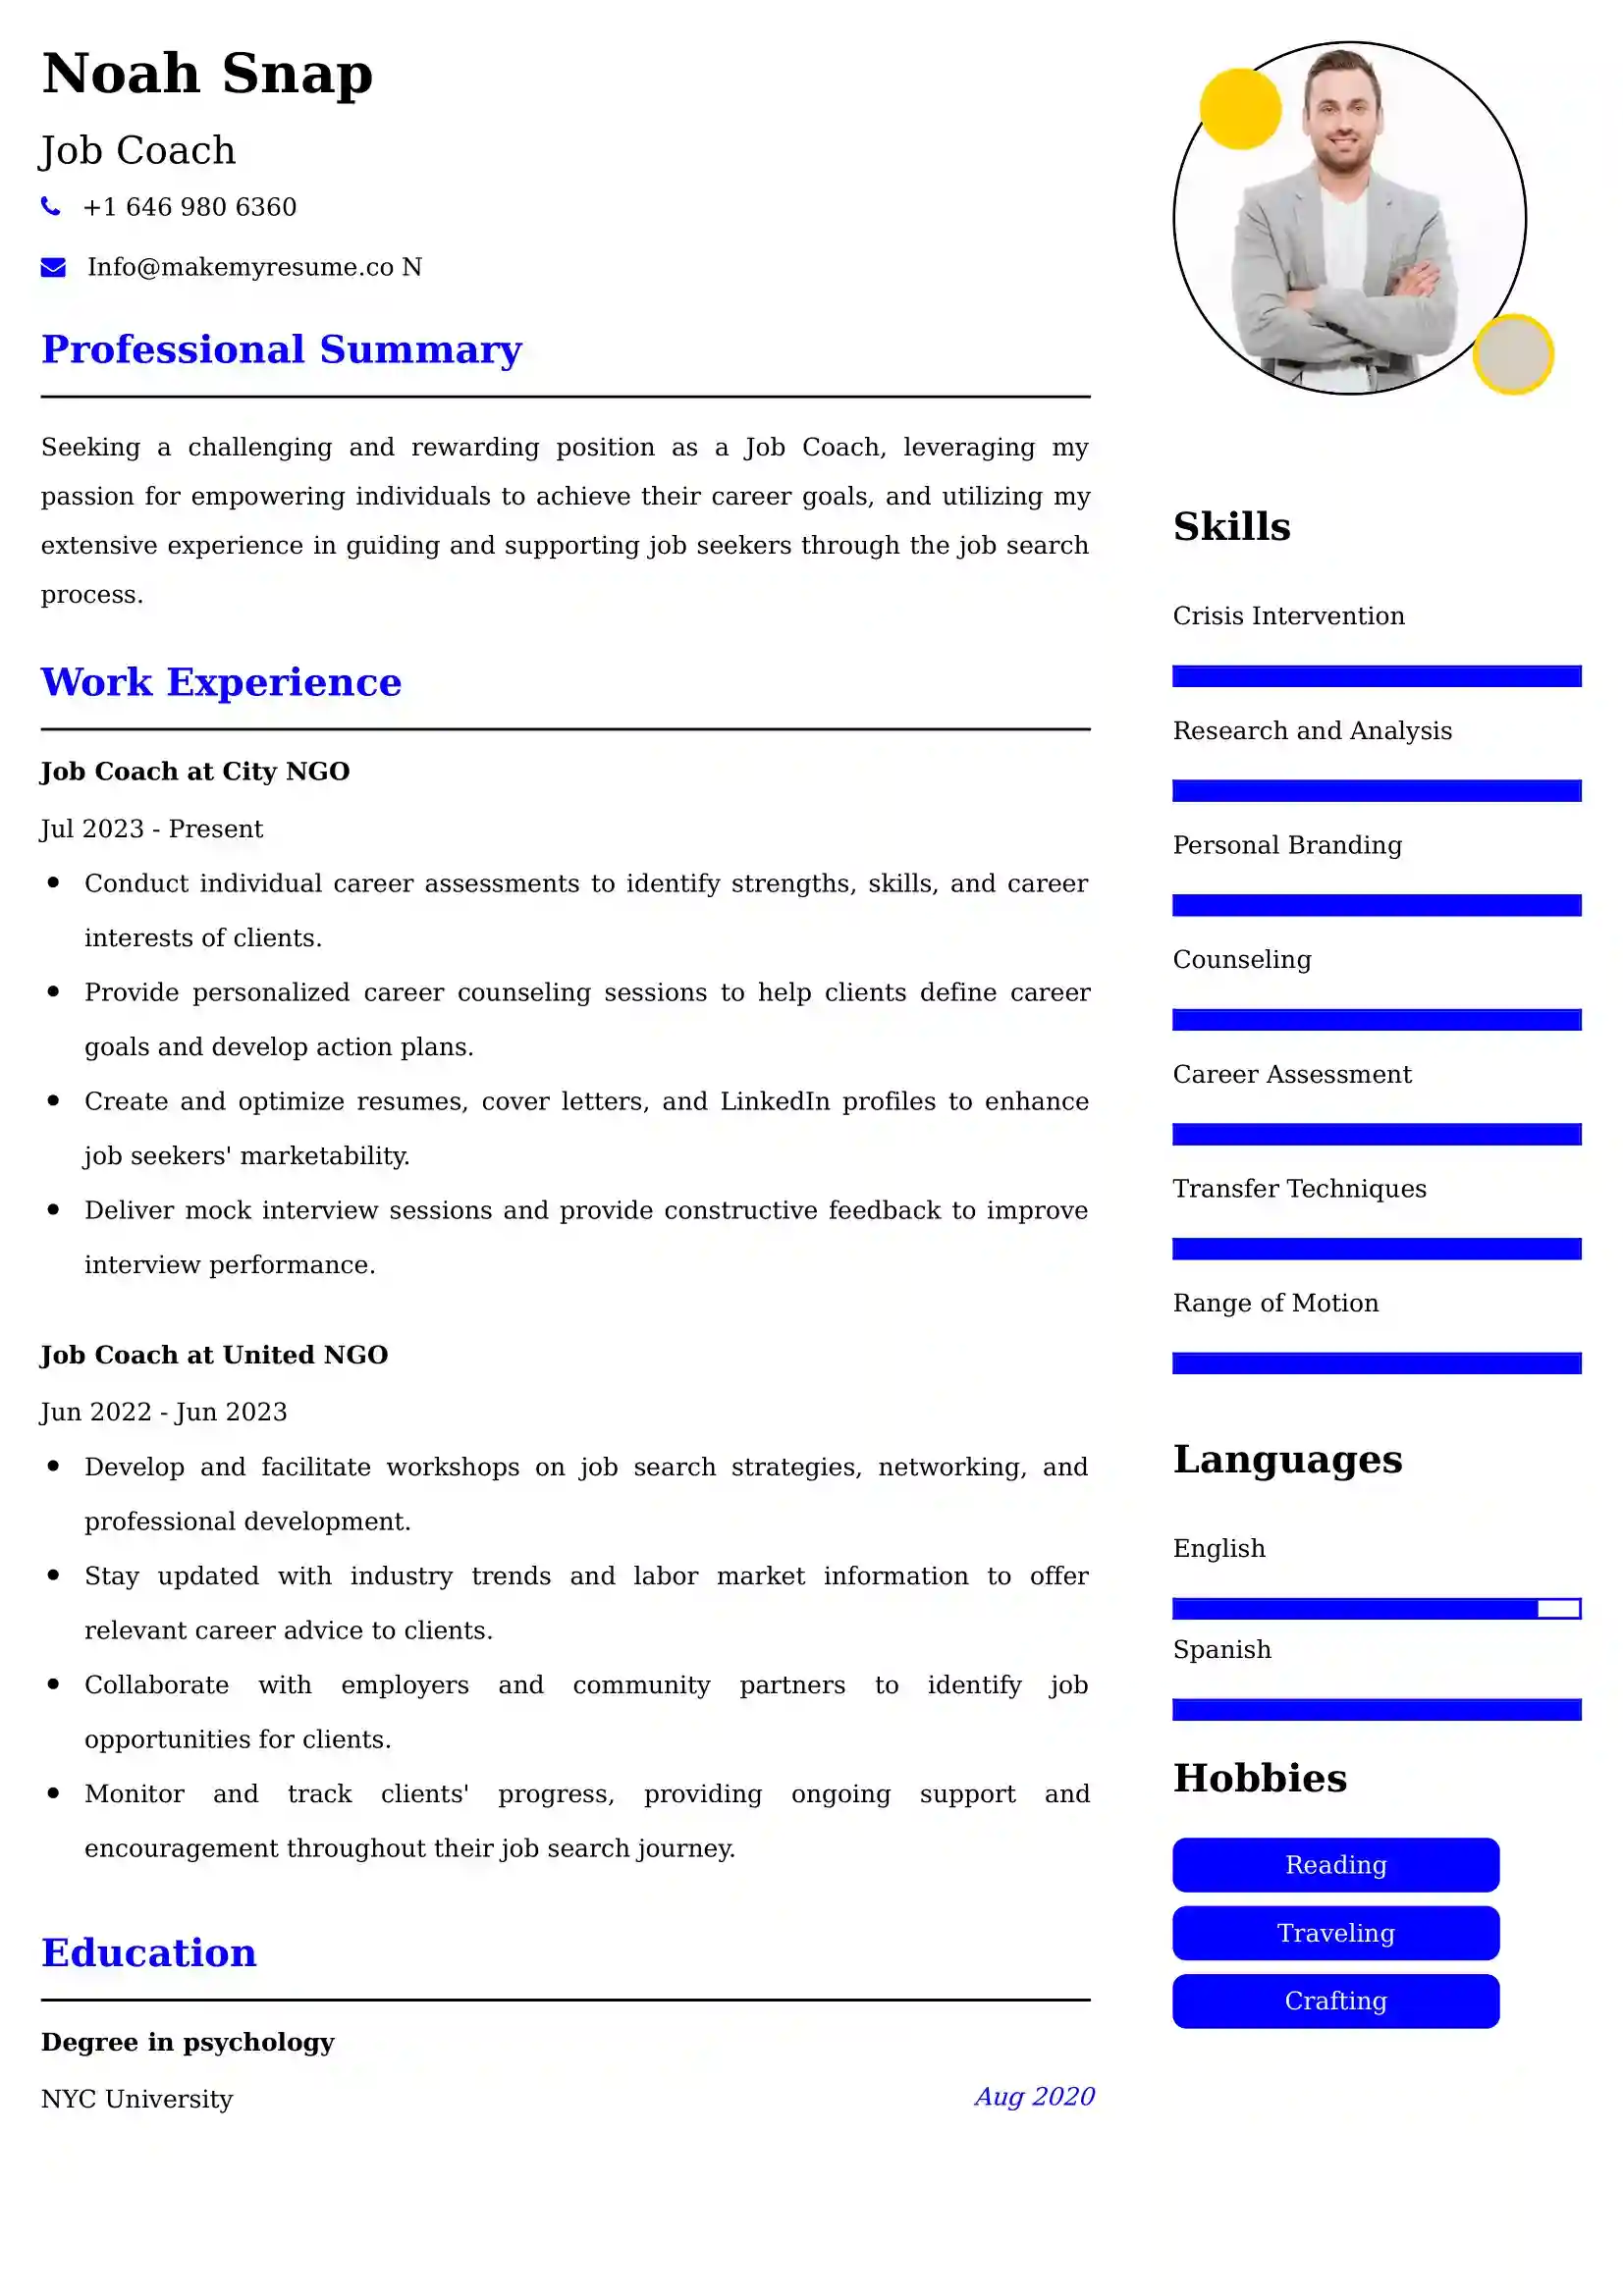 Best Job Coach Resume Examples for UK